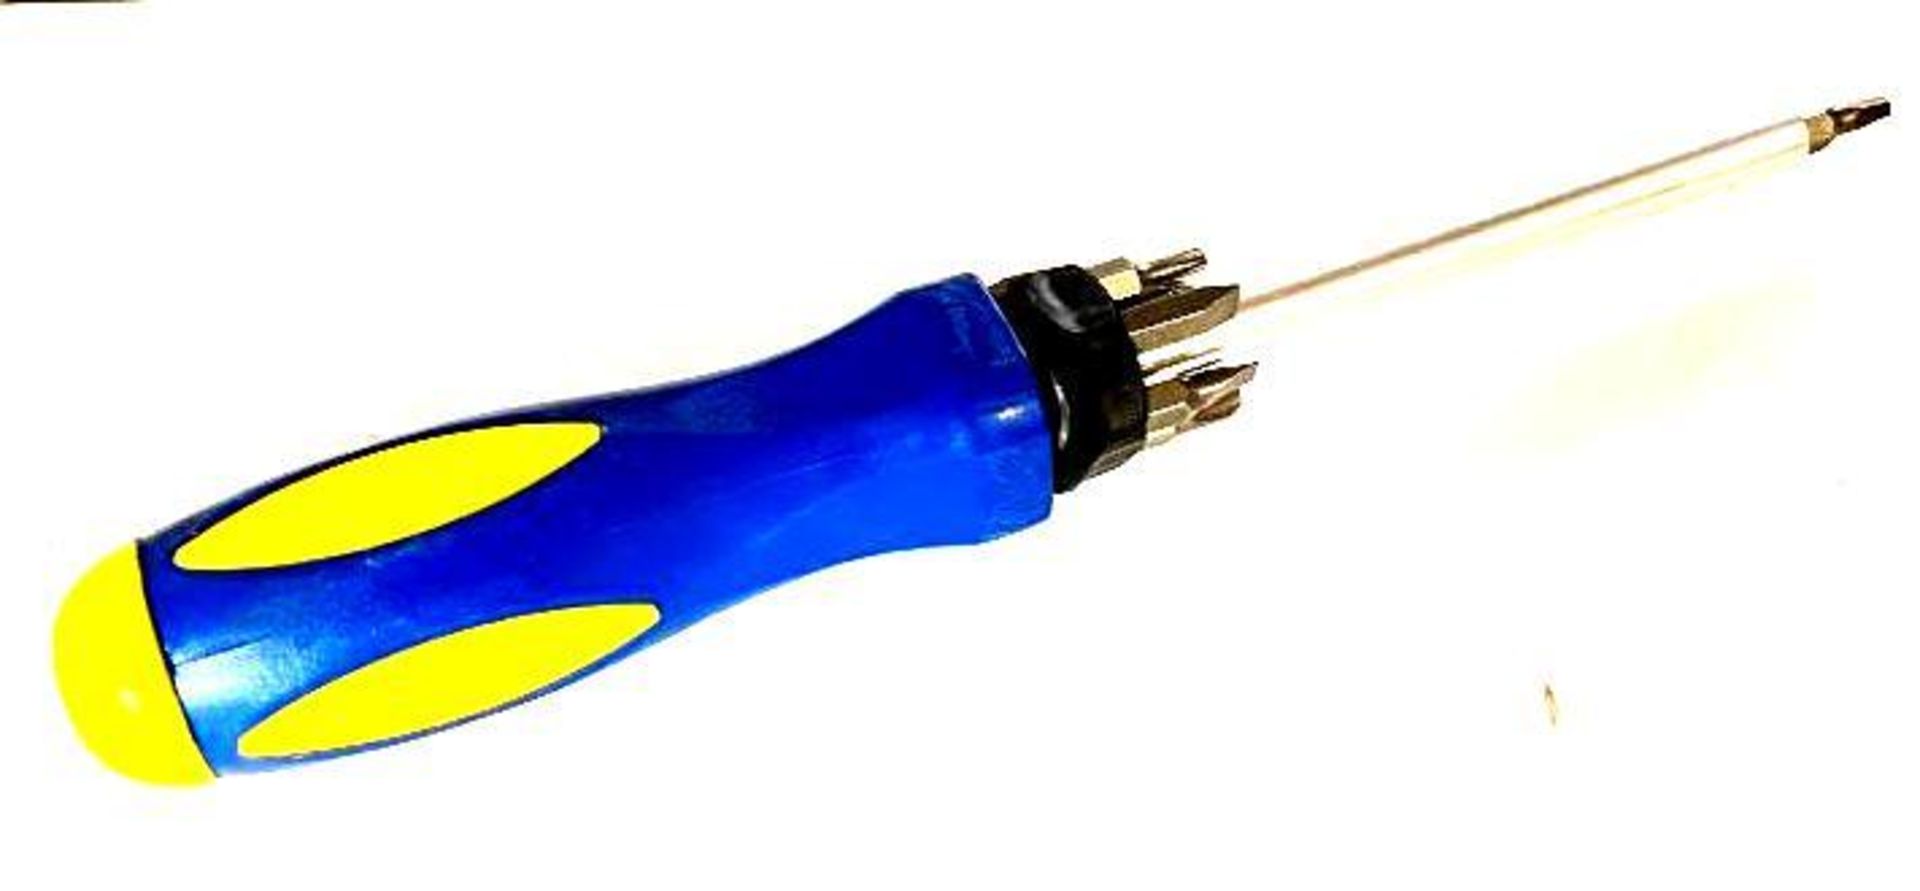 100CT 8-IN-1 MAGNETIC TELESCOPING SCREWDRIVER BRAND/MODEL EAZYPOWER ADDITIONAL INFO TOTAL LOT RETAIL